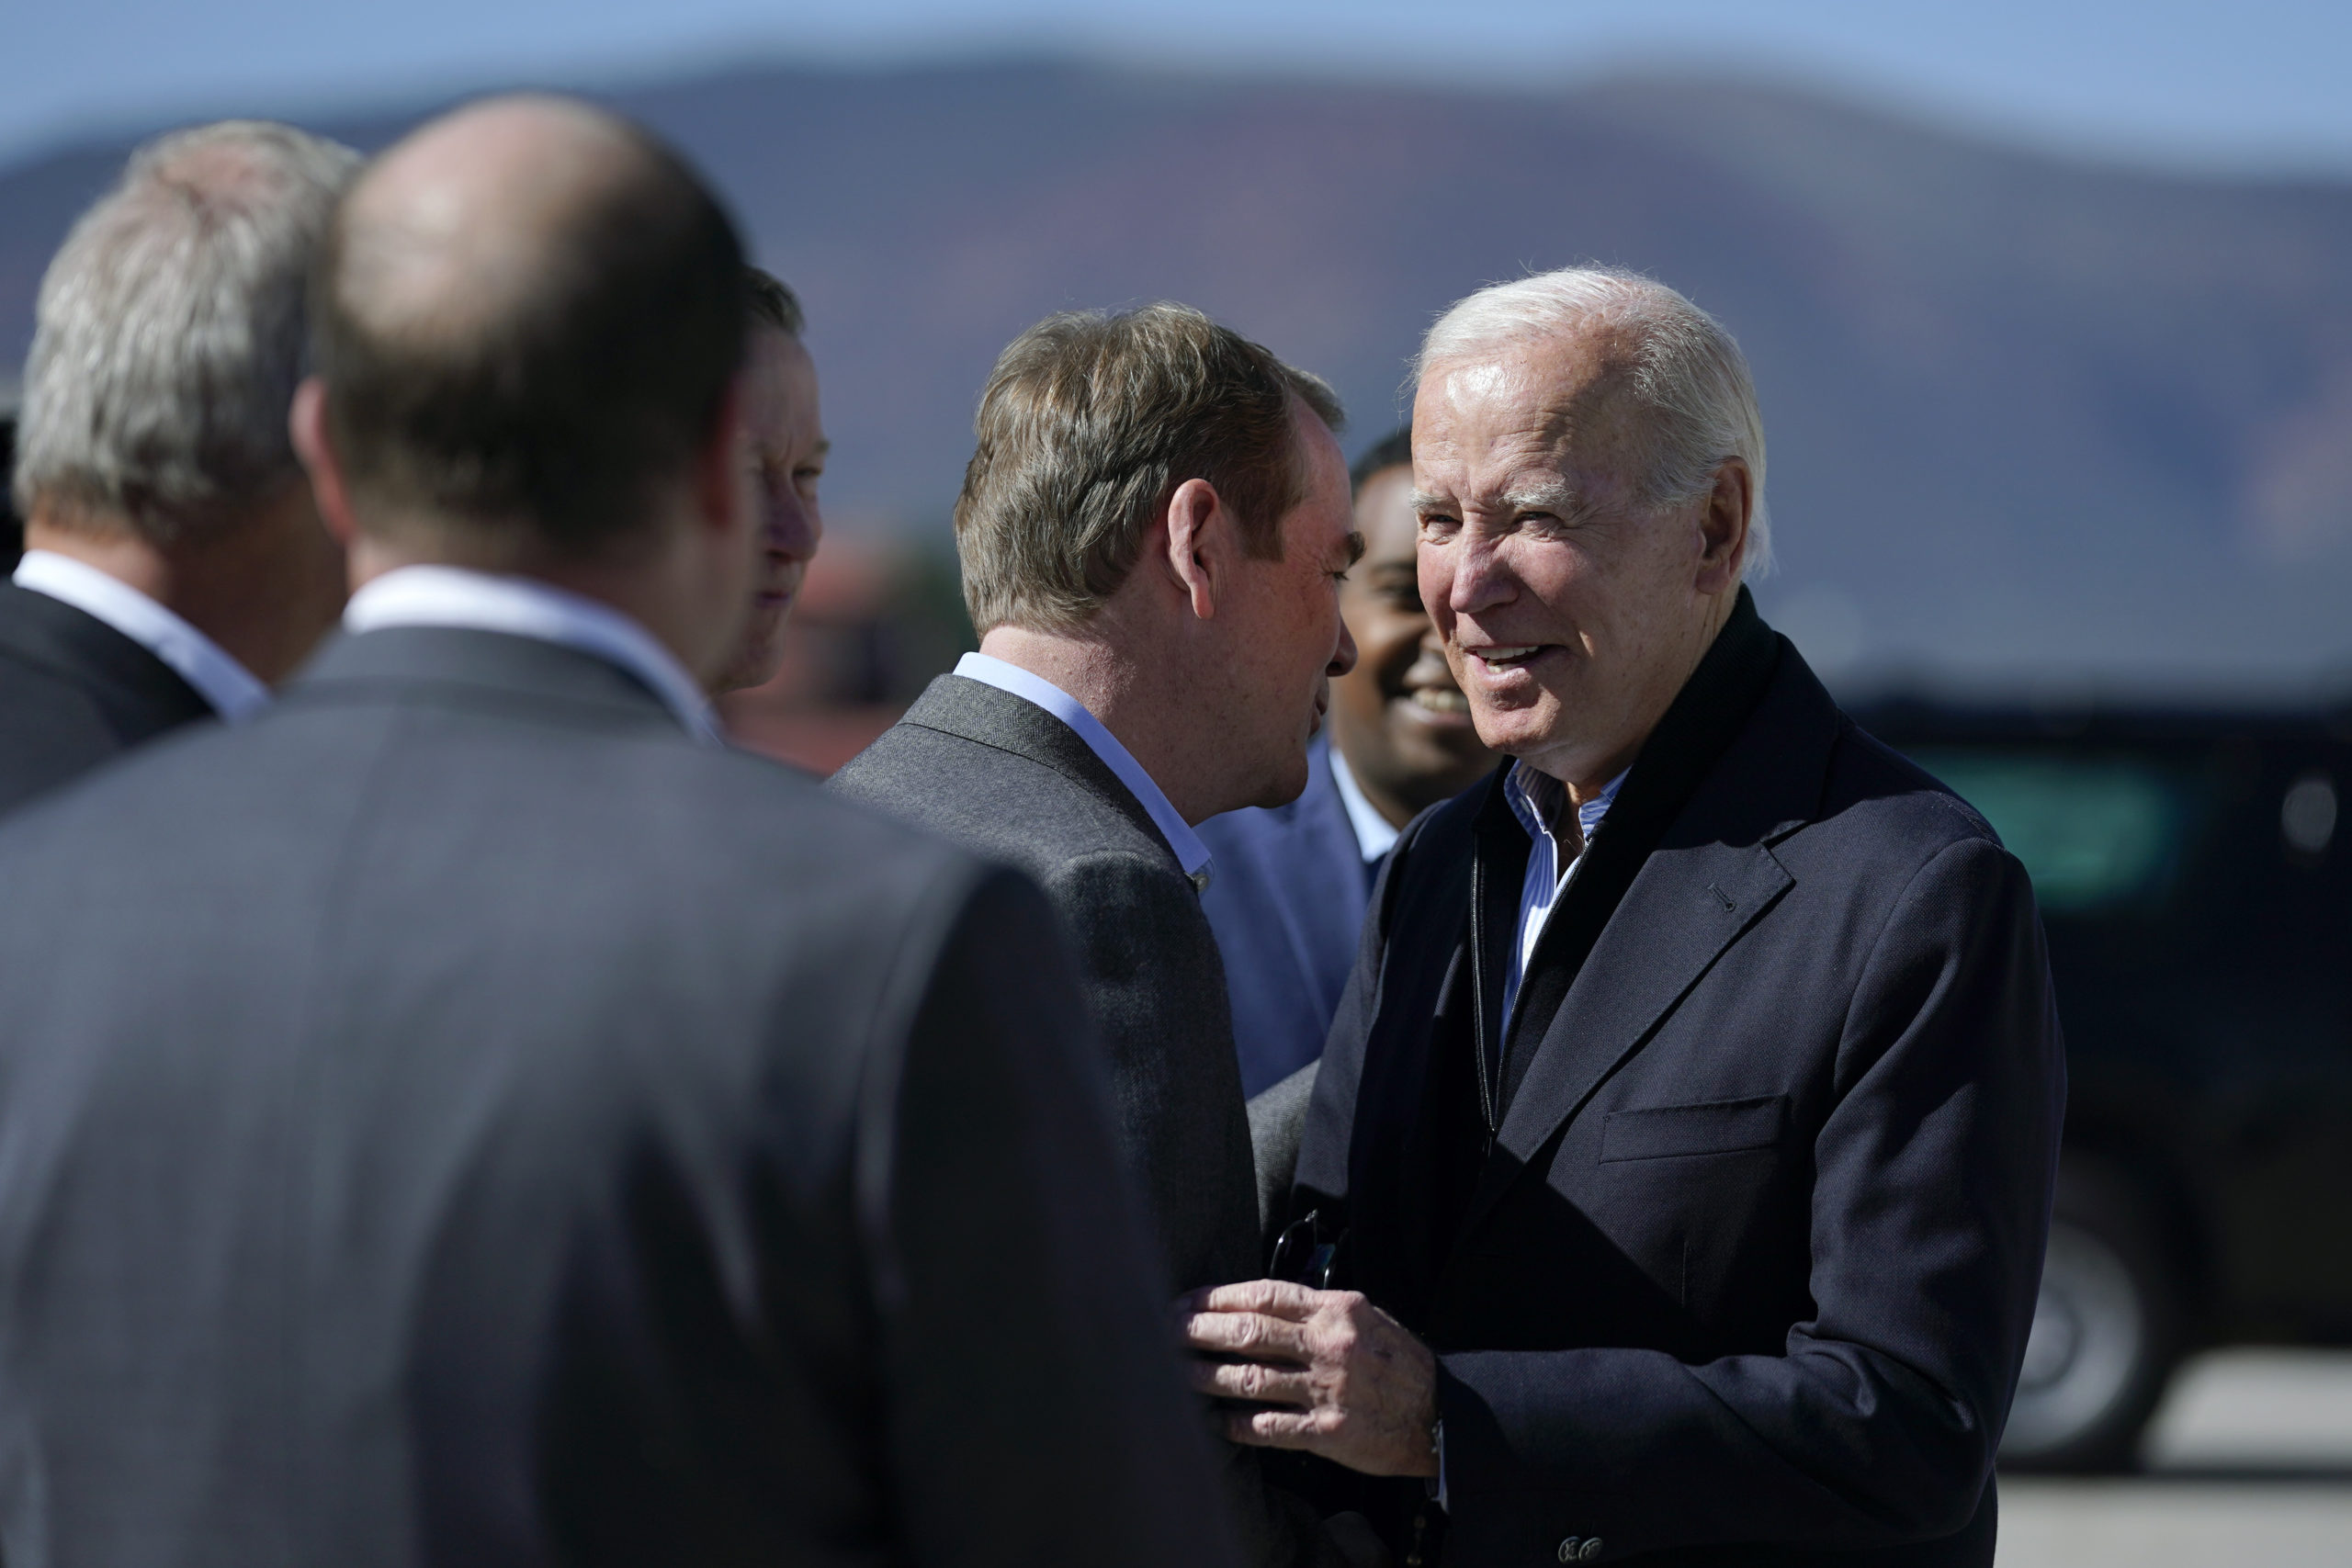 President Joe Biden was in Camp Hale near Leadville, Colorado, on Wednesday to designate the first national monument of his presidency.